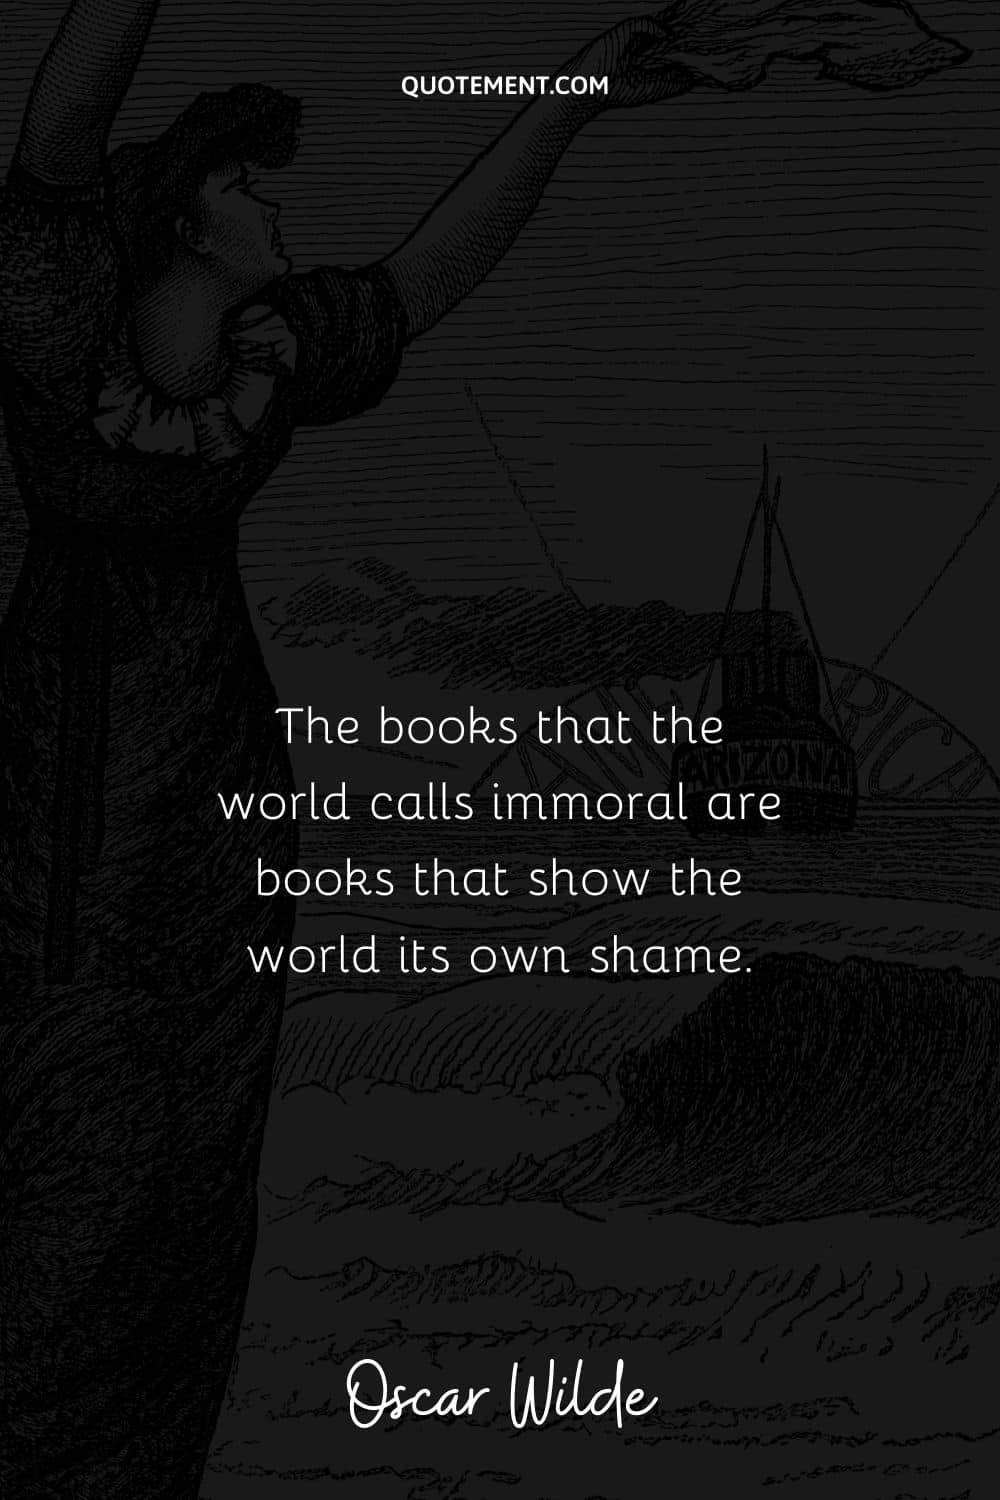 “The books that the world calls immoral are books that show the world its own shame.” ― Oscar Wilde